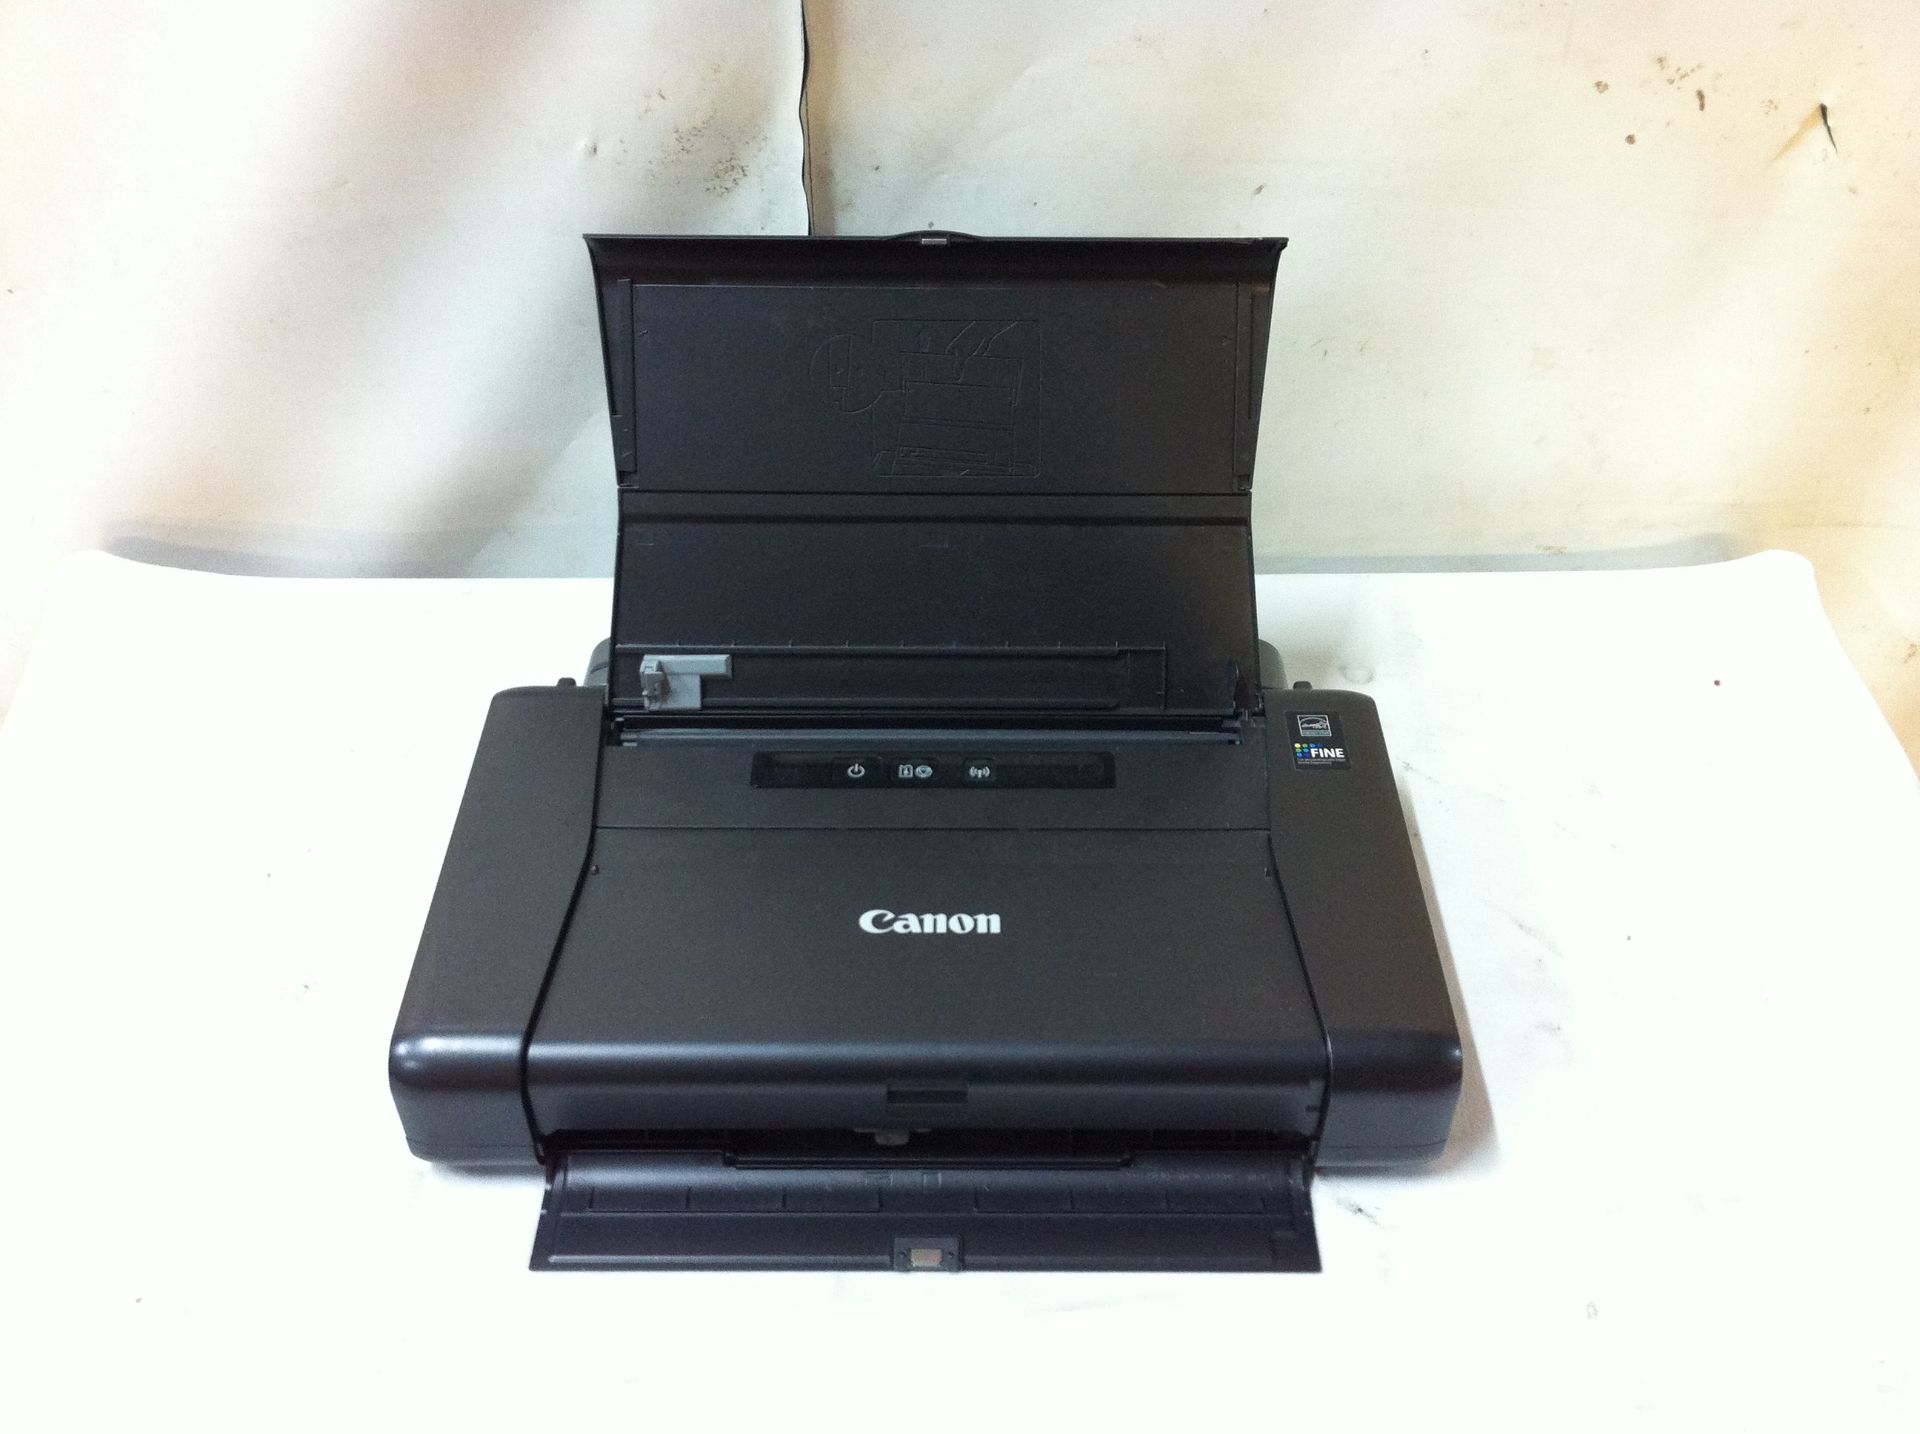 8x Cannon IP100 Portable Printers. - Image 4 of 4